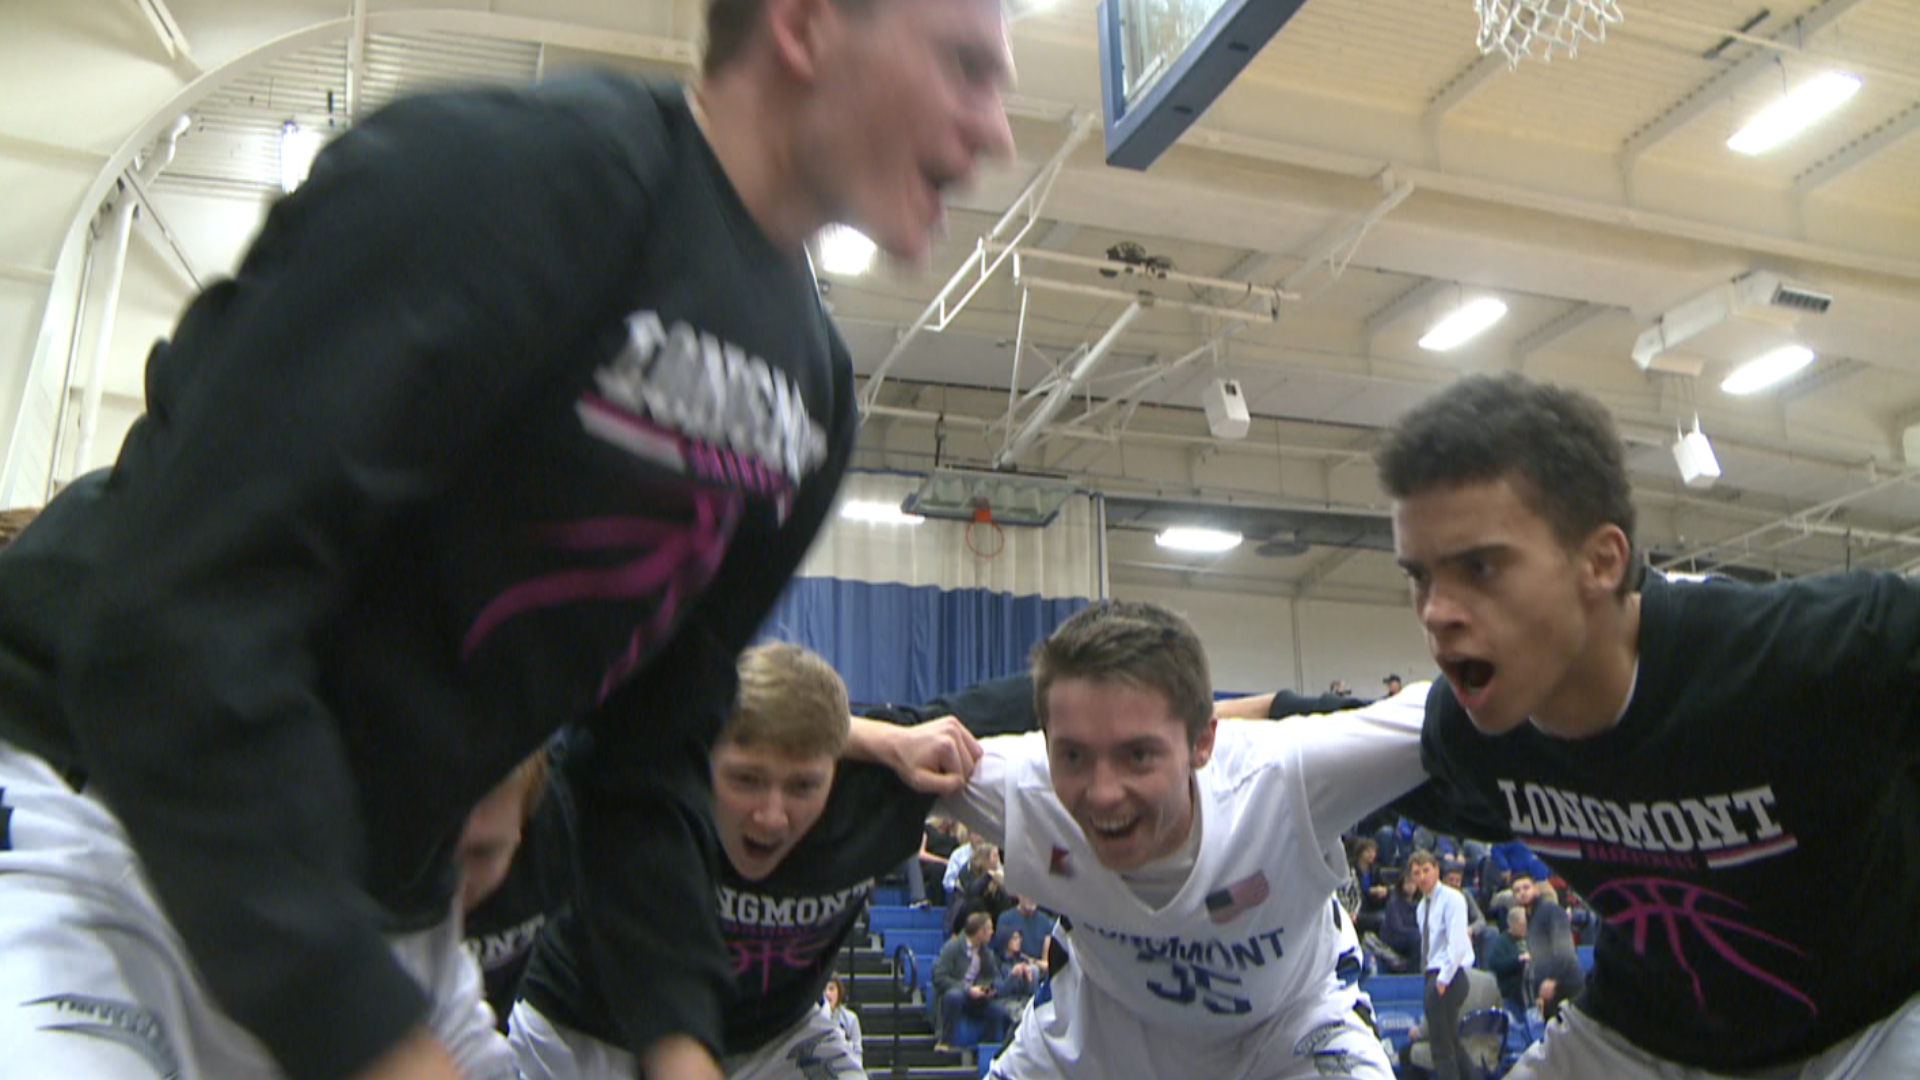 The Longmont High School boys basketball team rolled past Greeley Central 78-38 at home Friday night